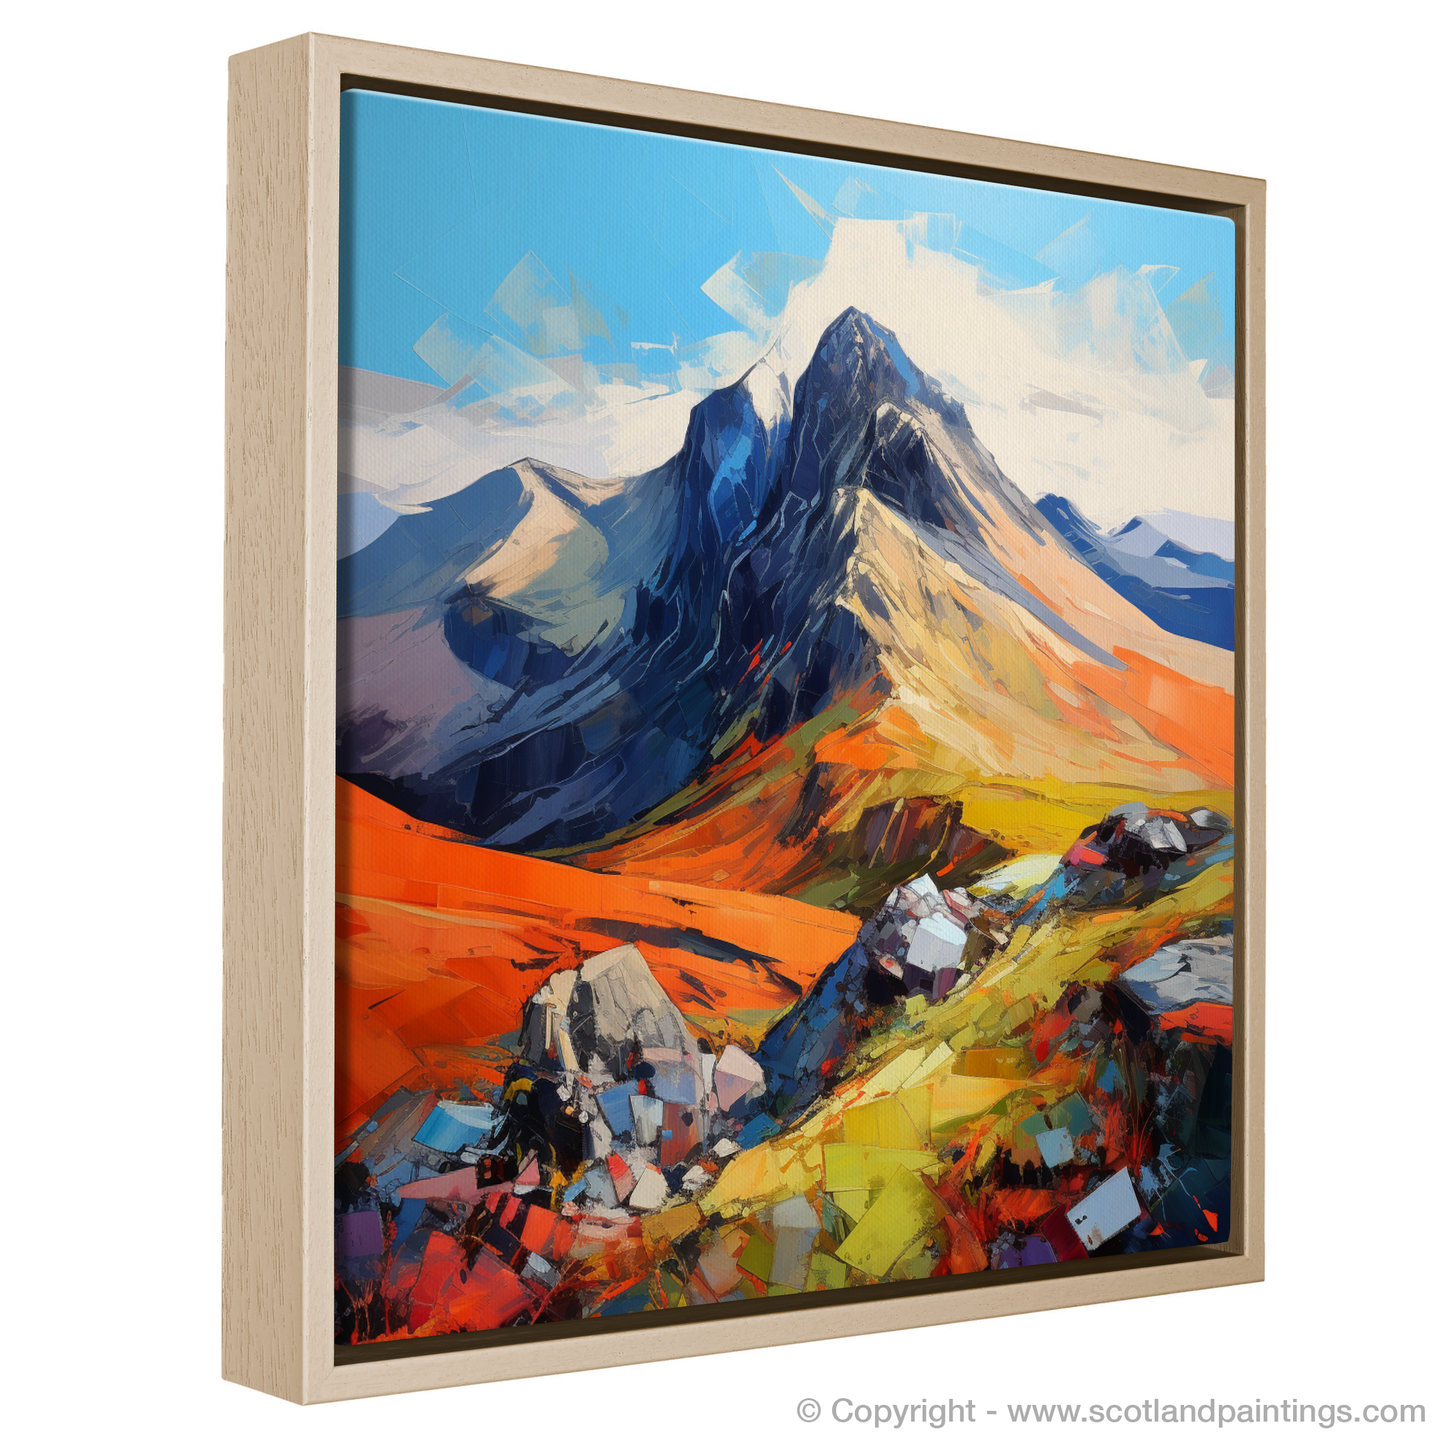 Painting and Art Print of The Cobbler, Arrochar Alps entitled "Majestic Cobbler: An Expressionist Tribute to Scottish Highlands".